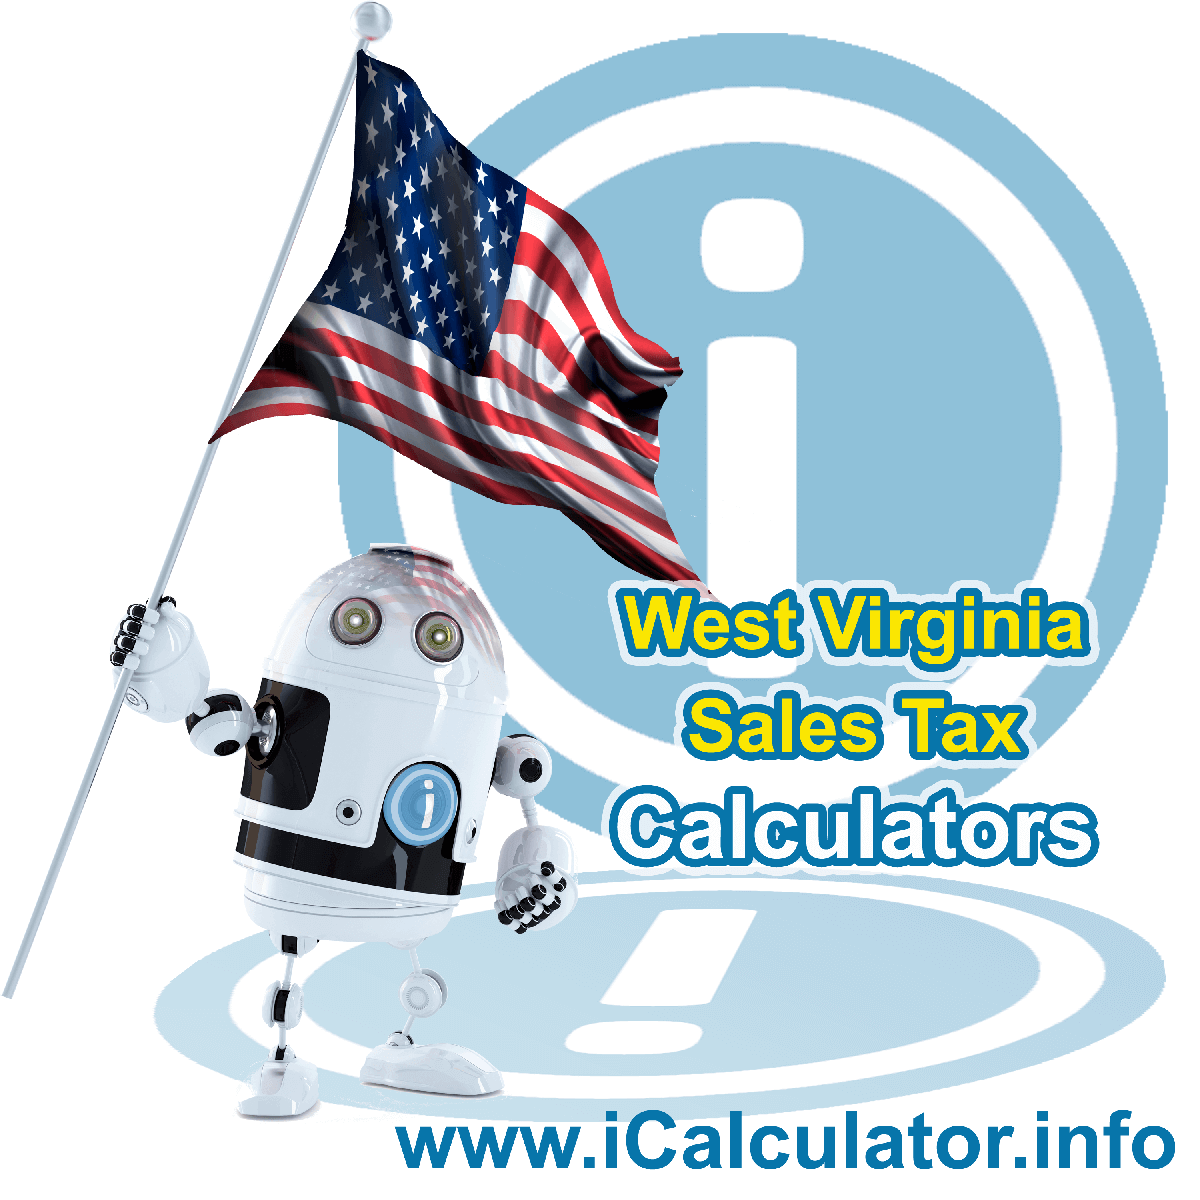 Wheeling, West Virginia Sales Tax Comparison Calculator: This image illustrates a calculator robot comparing sales tax in Wheeling, West Virginia manually using the Wheeling, West Virginia Sales Tax Formula. You can use this information to compare Sales Tax manually or use the Wheeling, West Virginia Sales Tax Comparison Calculator to calculate and compare Wheeling, West Virginia sales tax online.